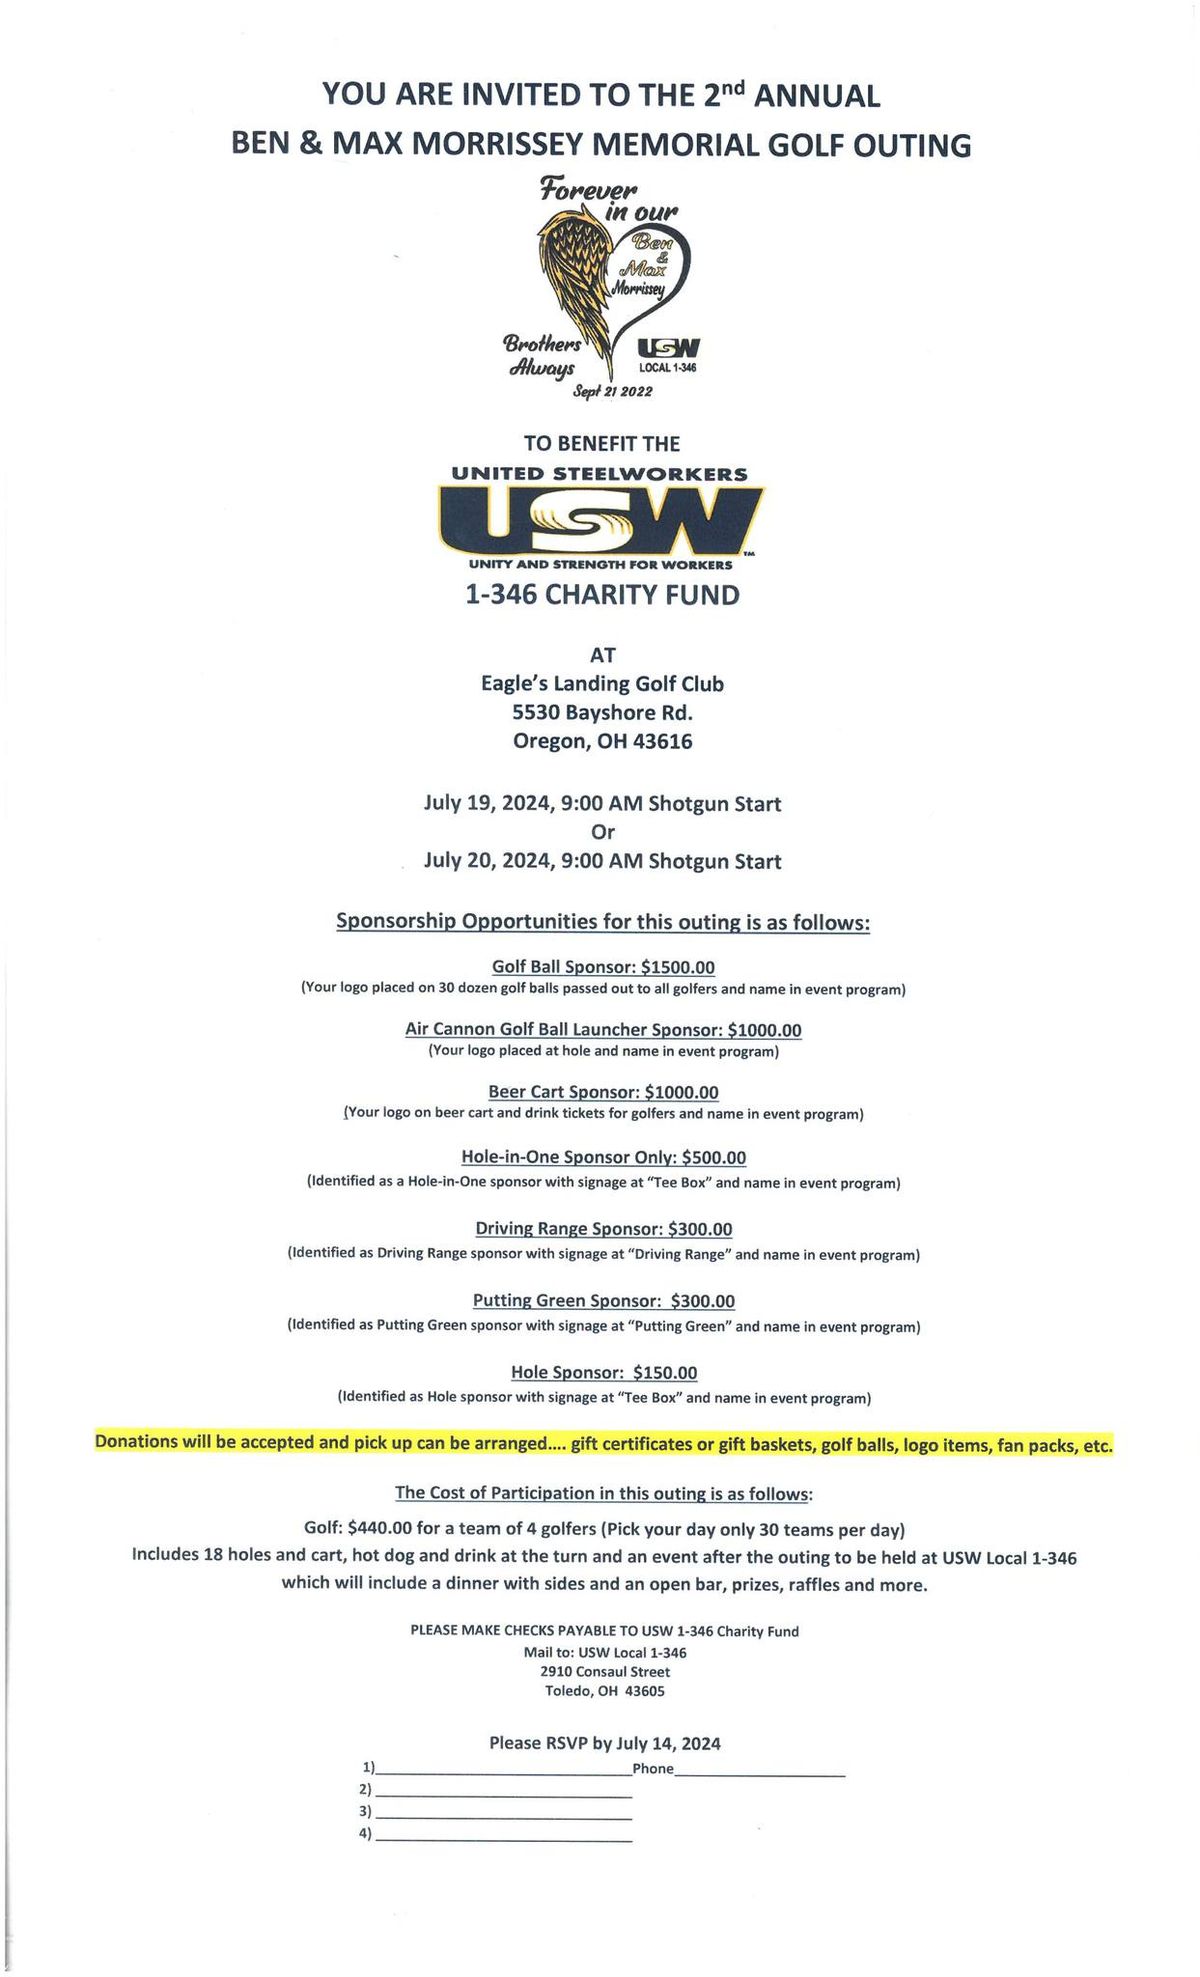 2nd Annual Ben & Max Morrissey Memorial Golf Outing to benefit the USW 1-346 Charity Fund